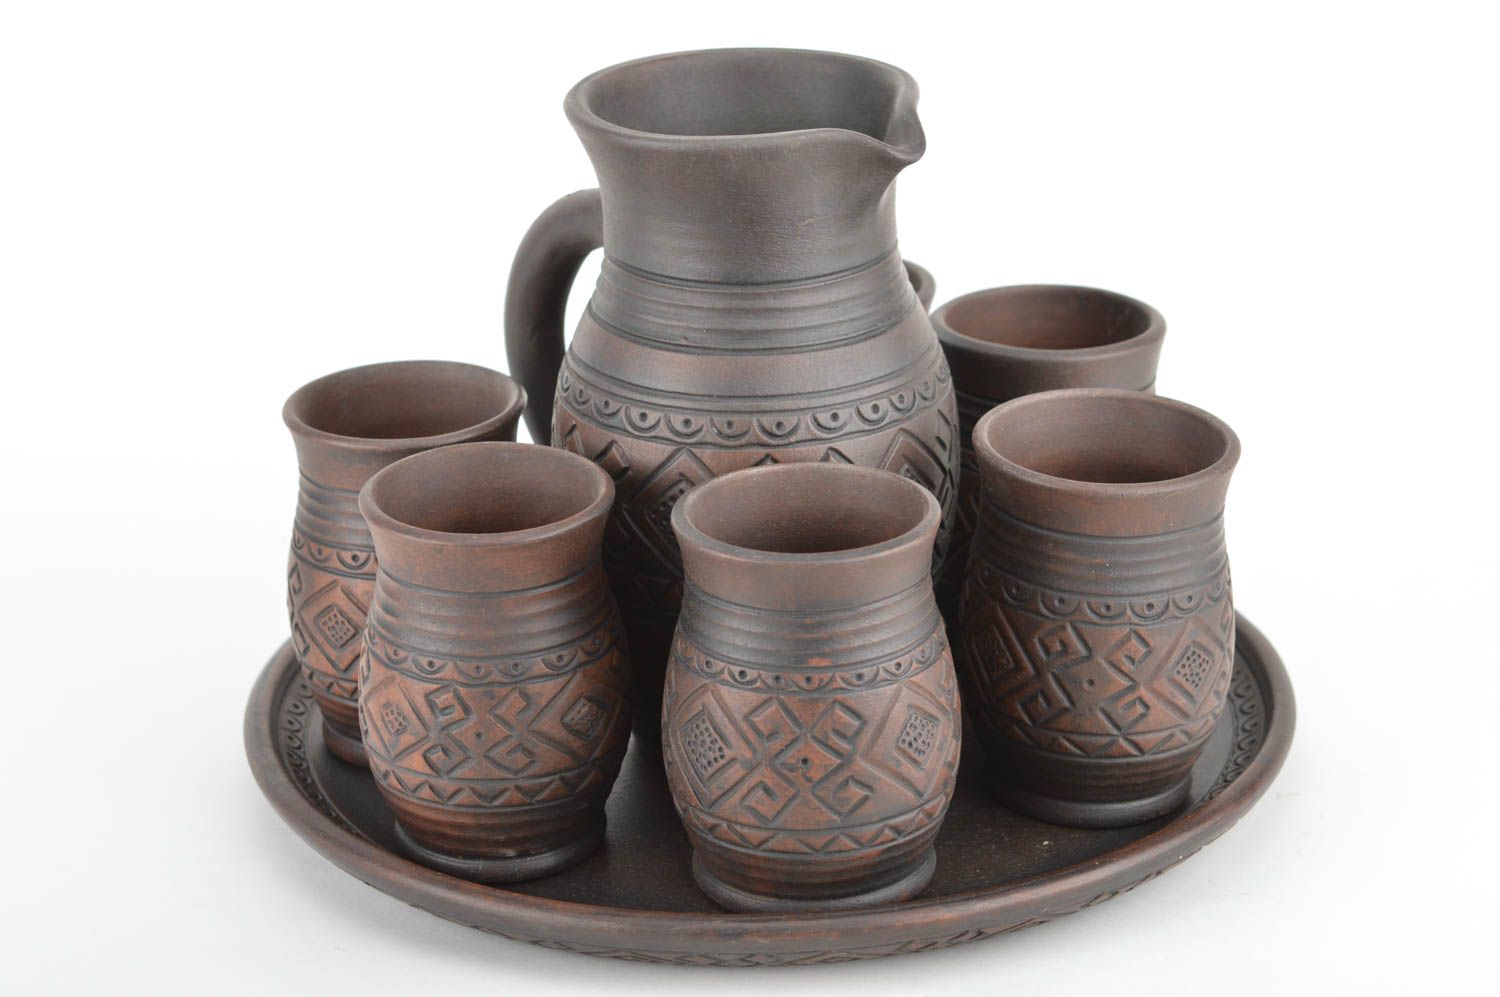 30 oz ceramic wine jug in dark brown color with six wine goblets and ashtray 8,7 lb photo 2